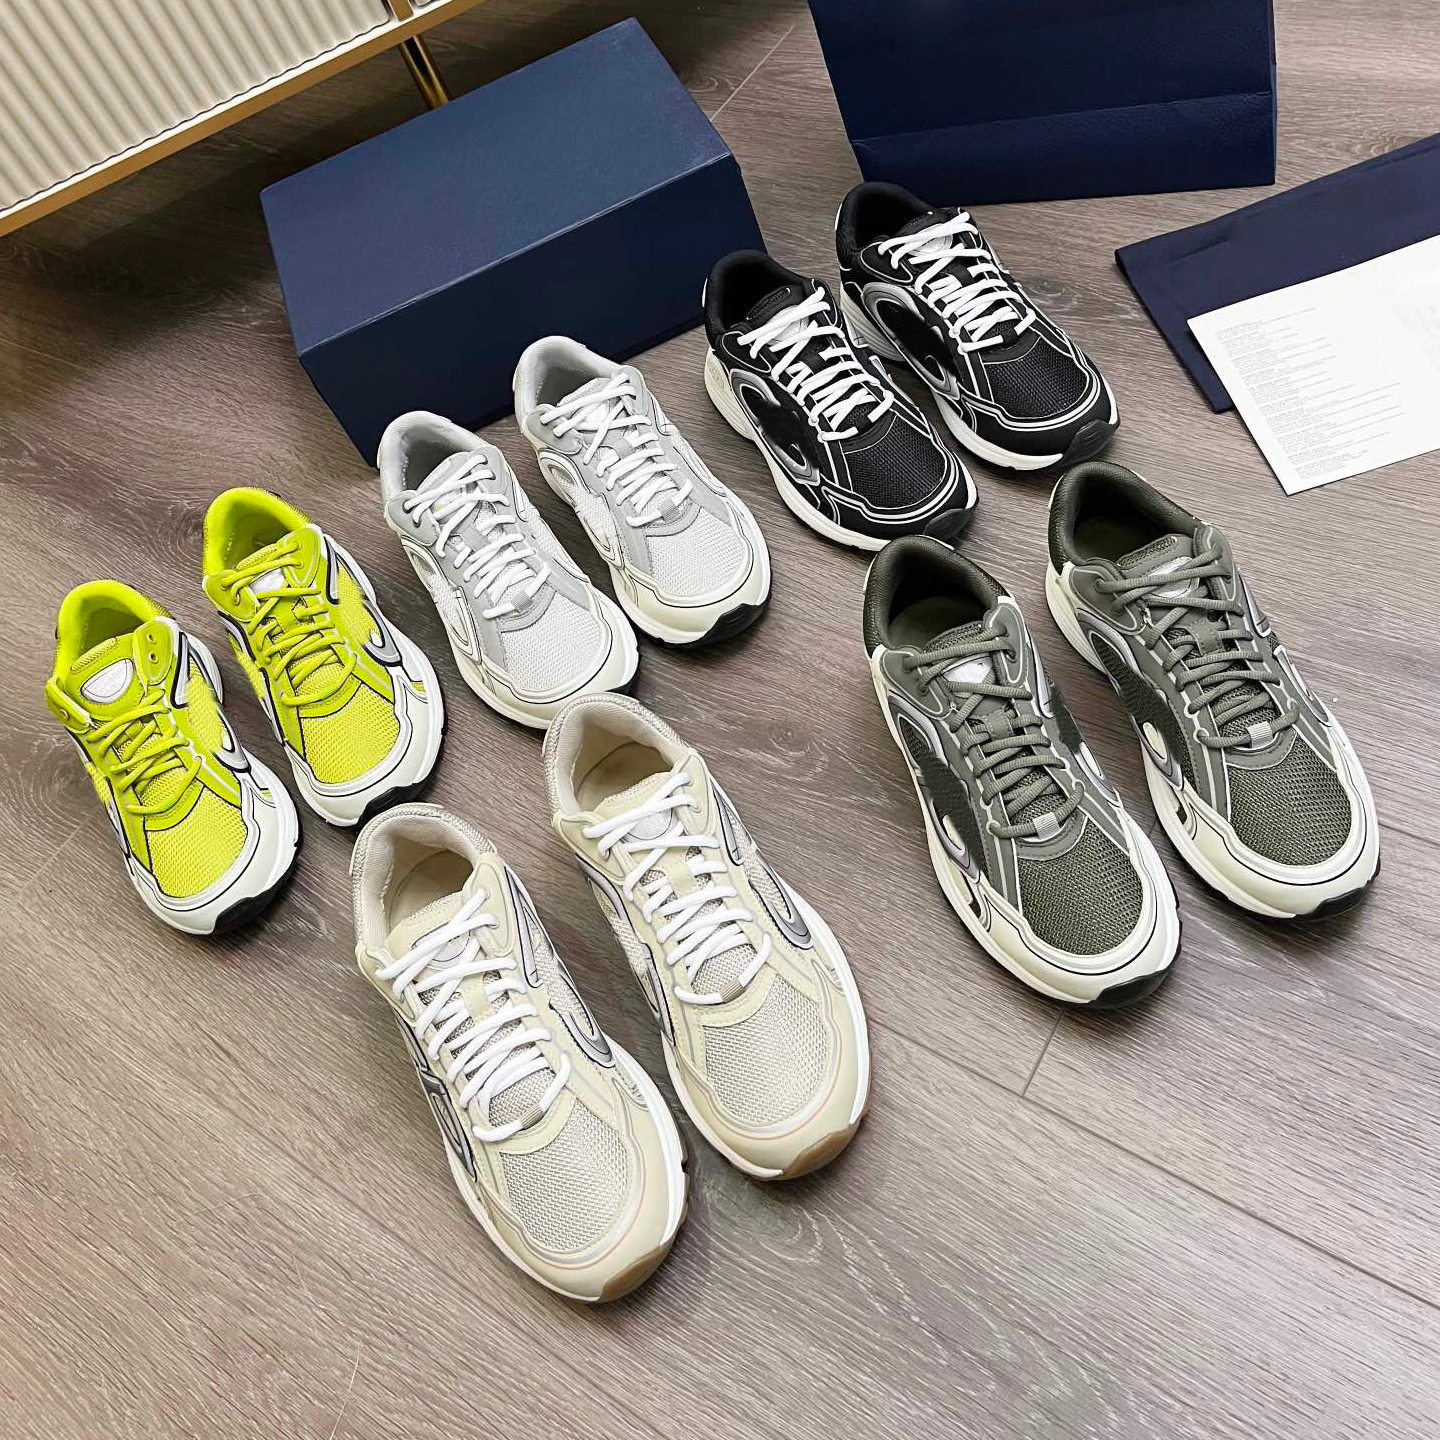 

2023 B30 Designer Sneakers Men Women Vintage Chunky Casual Shoes Calfskin Mesh Grey Technical Oblique Runner Trainers Outdoor Shoe